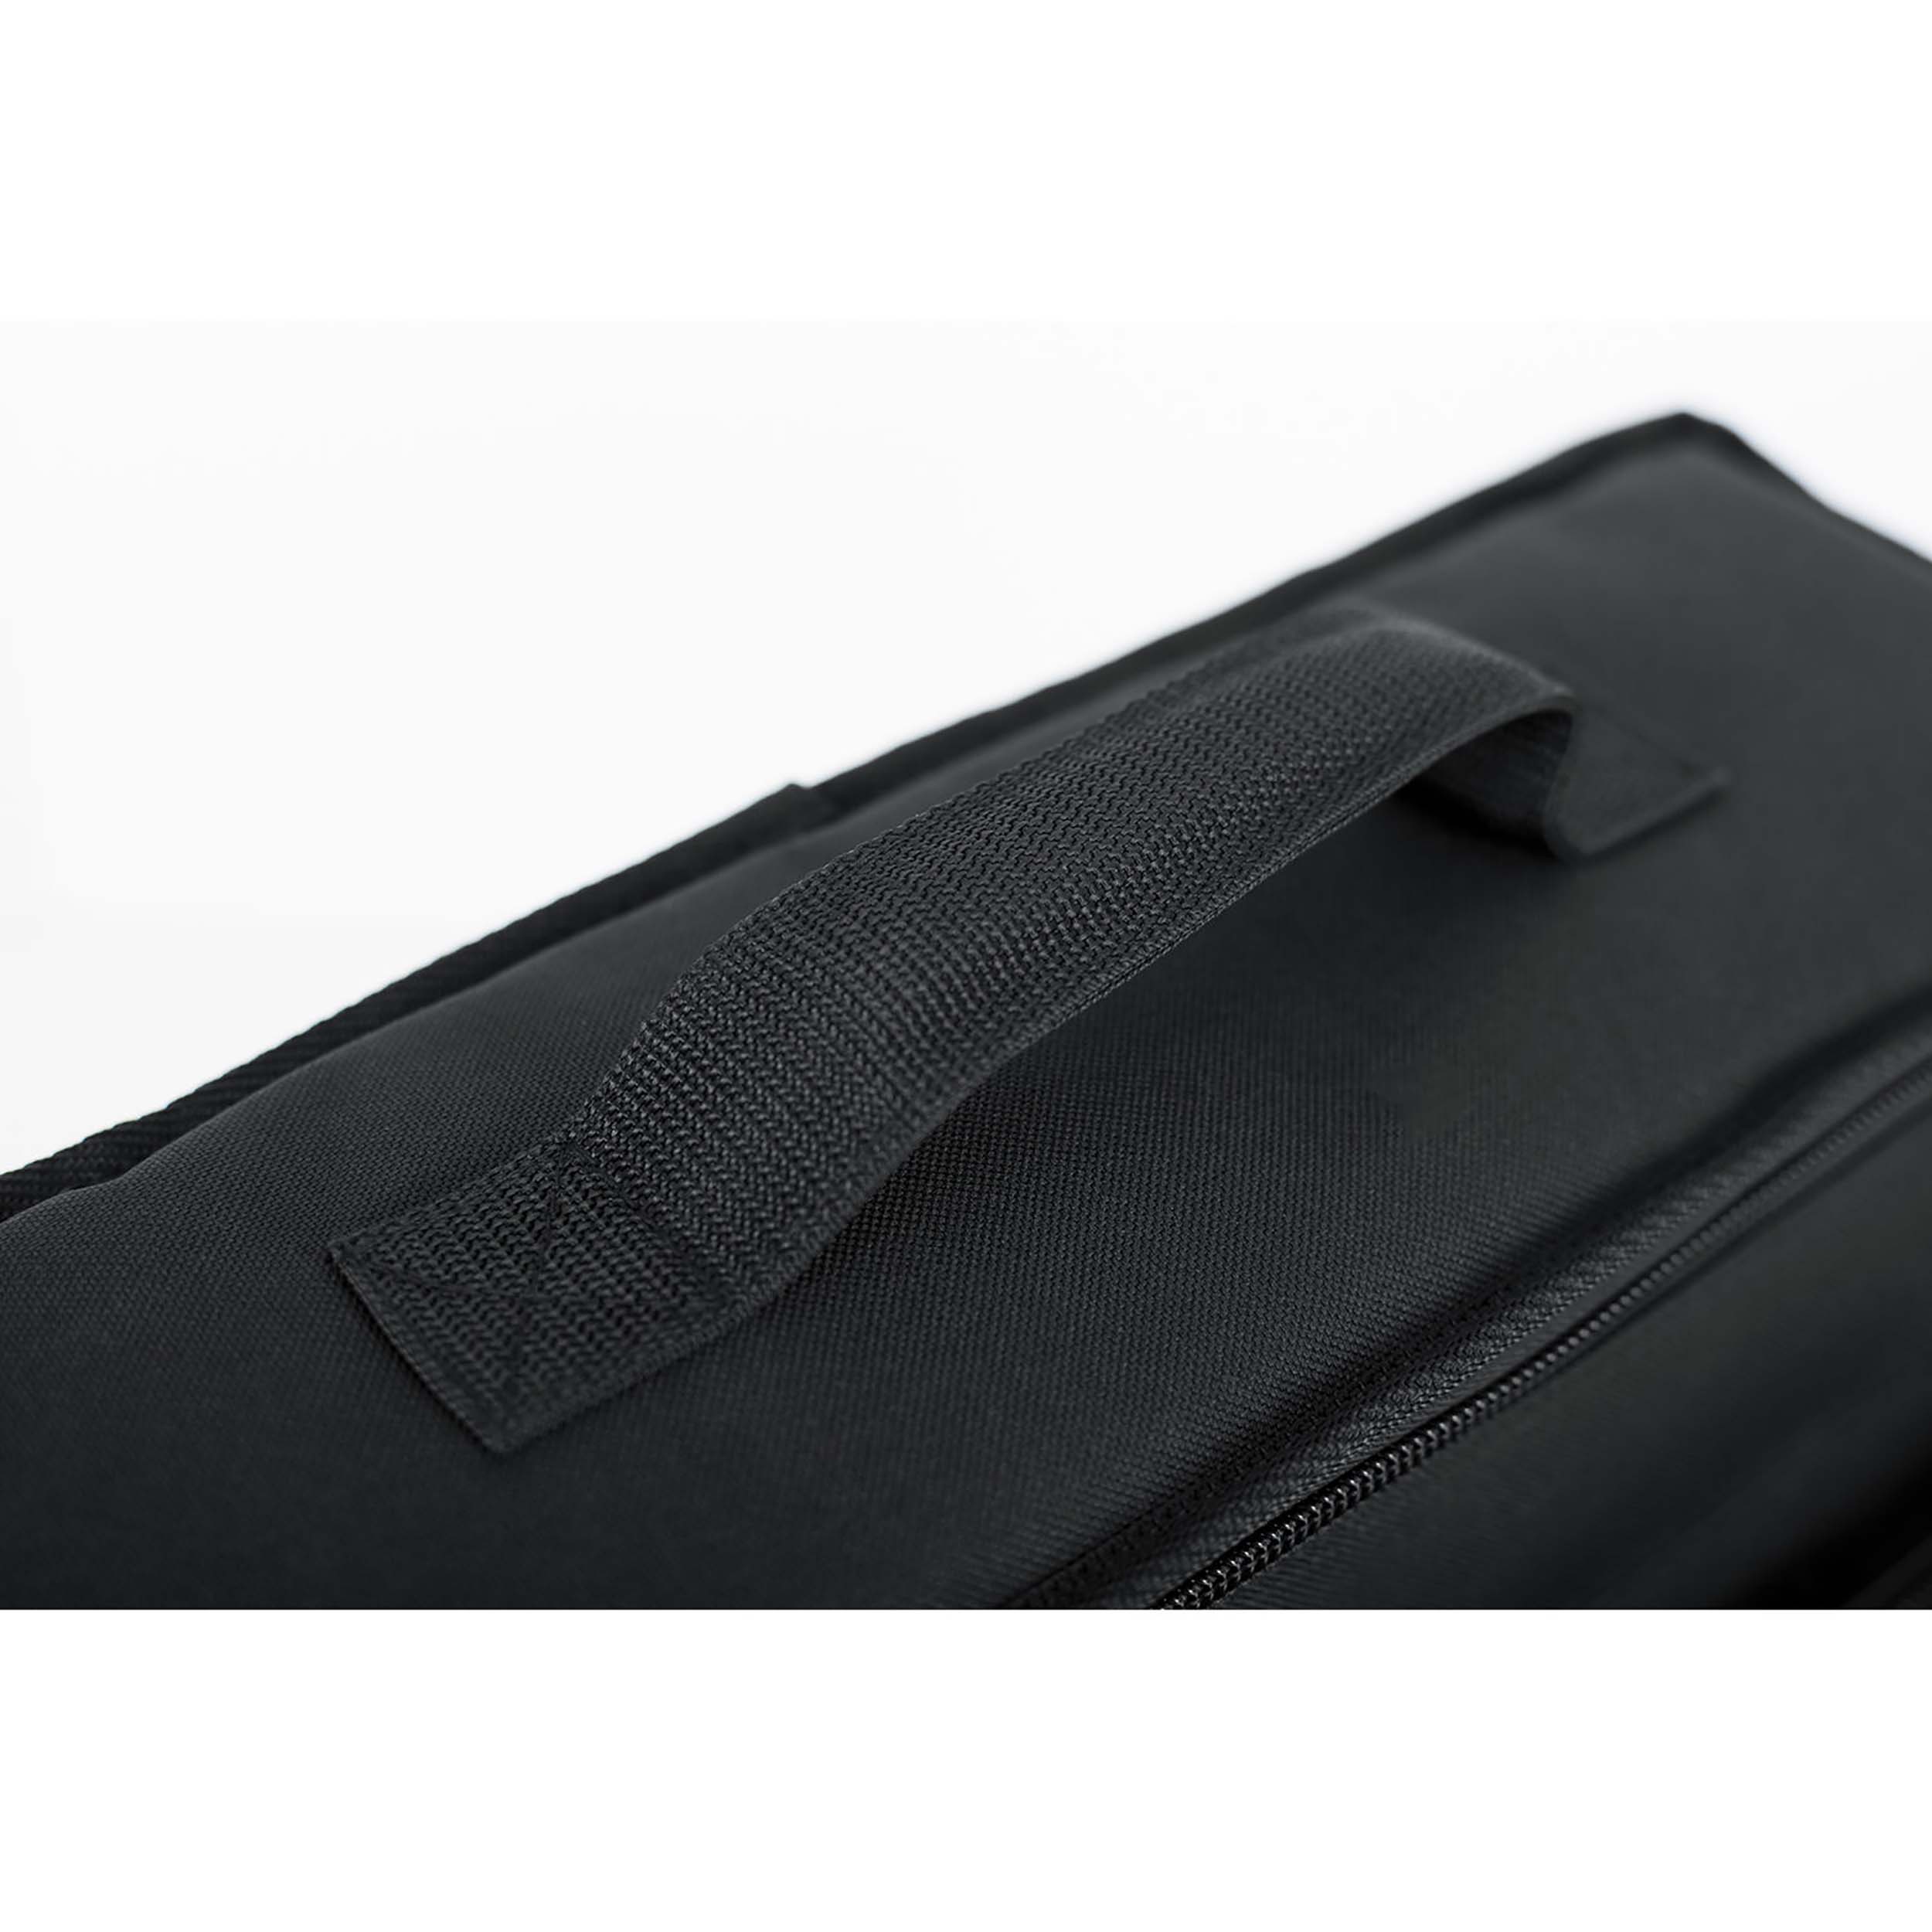 Gator Cases GM-2W 2 Wireless Systems Bag by Gator Cases